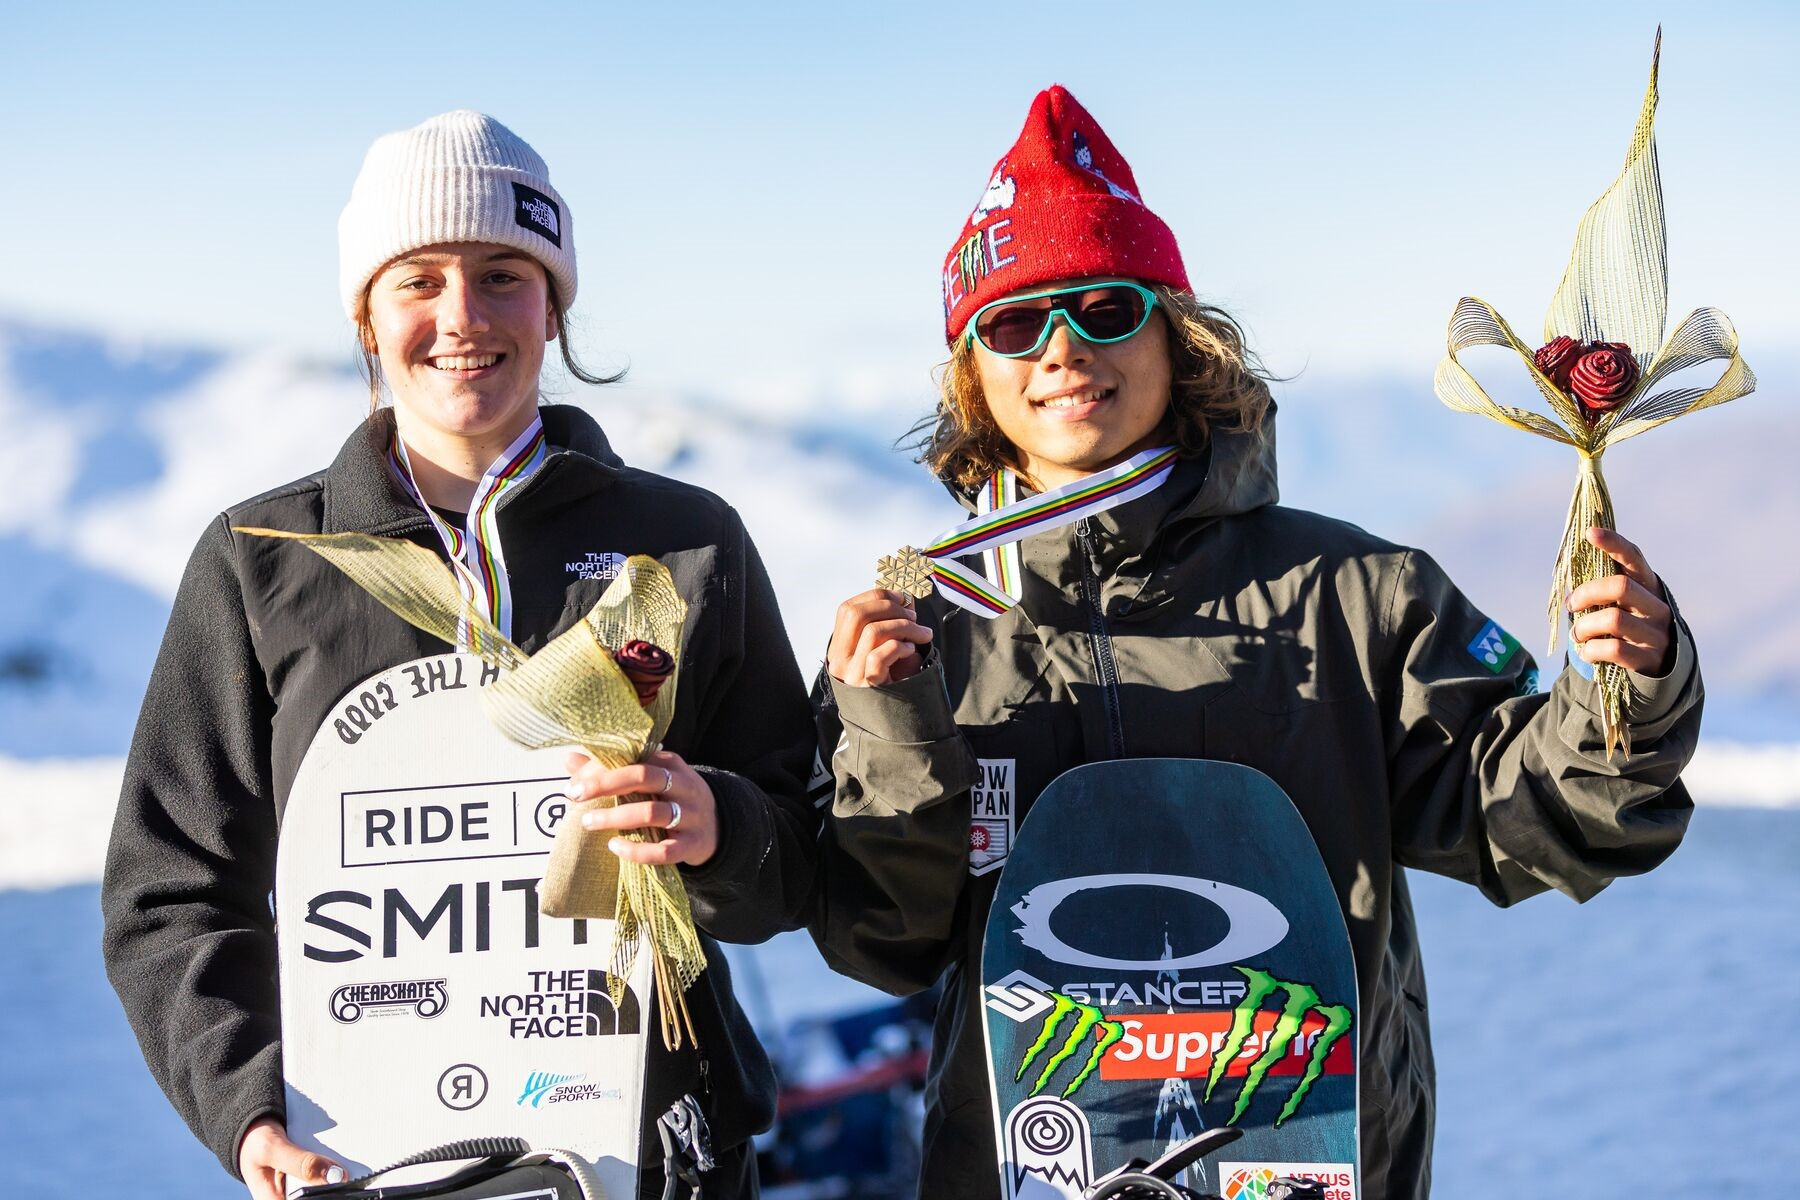 Japan's Taiga Hasegawa, right, won two golds at the FIS Park and Pipe Junior World Championships in Cardrona, while Lucia Georgalli, left, earned New Zealand's first-ever gold at the event ©Winter Games NZ